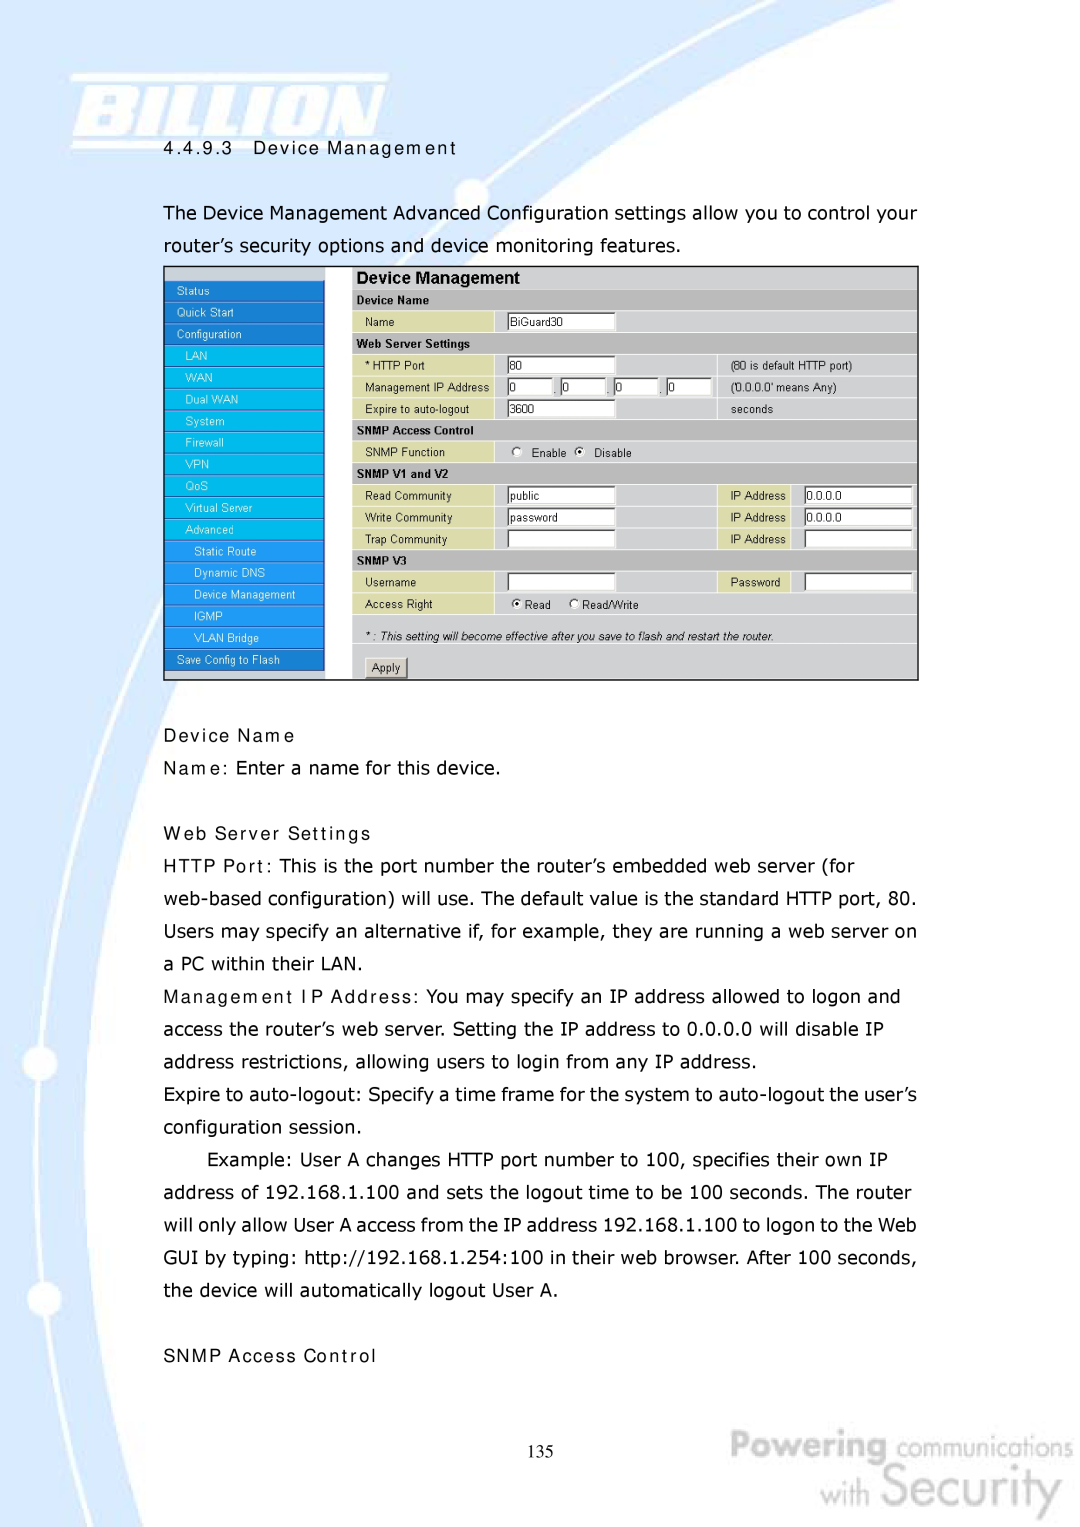 Billion Electric Company 30 user manual Device Management, Device Name, Web Server Settings, SNMP Access Control 